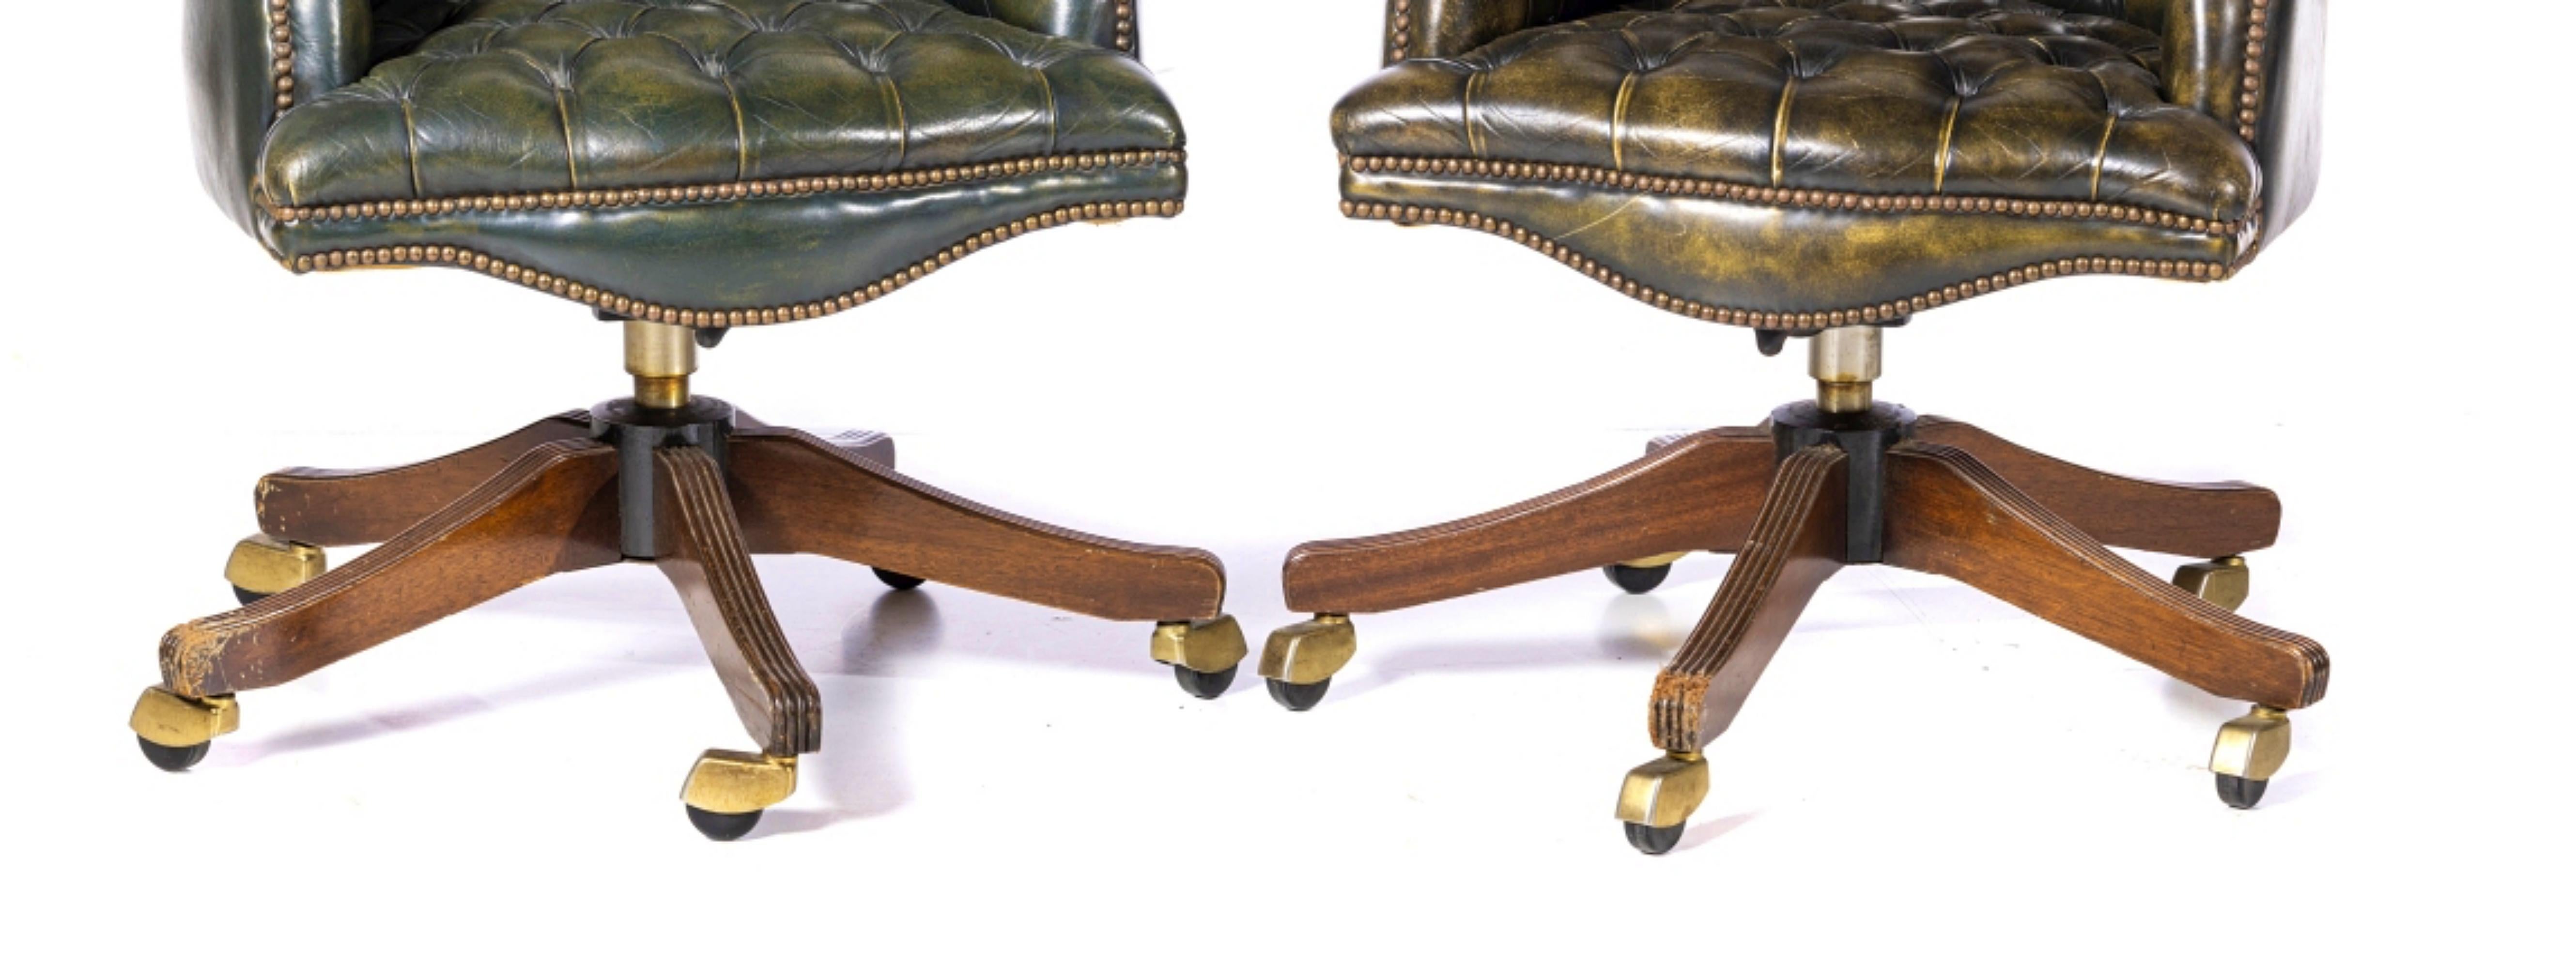 Victorian Pair of English Swiveling Desk Chairs Early 20th Century For Sale